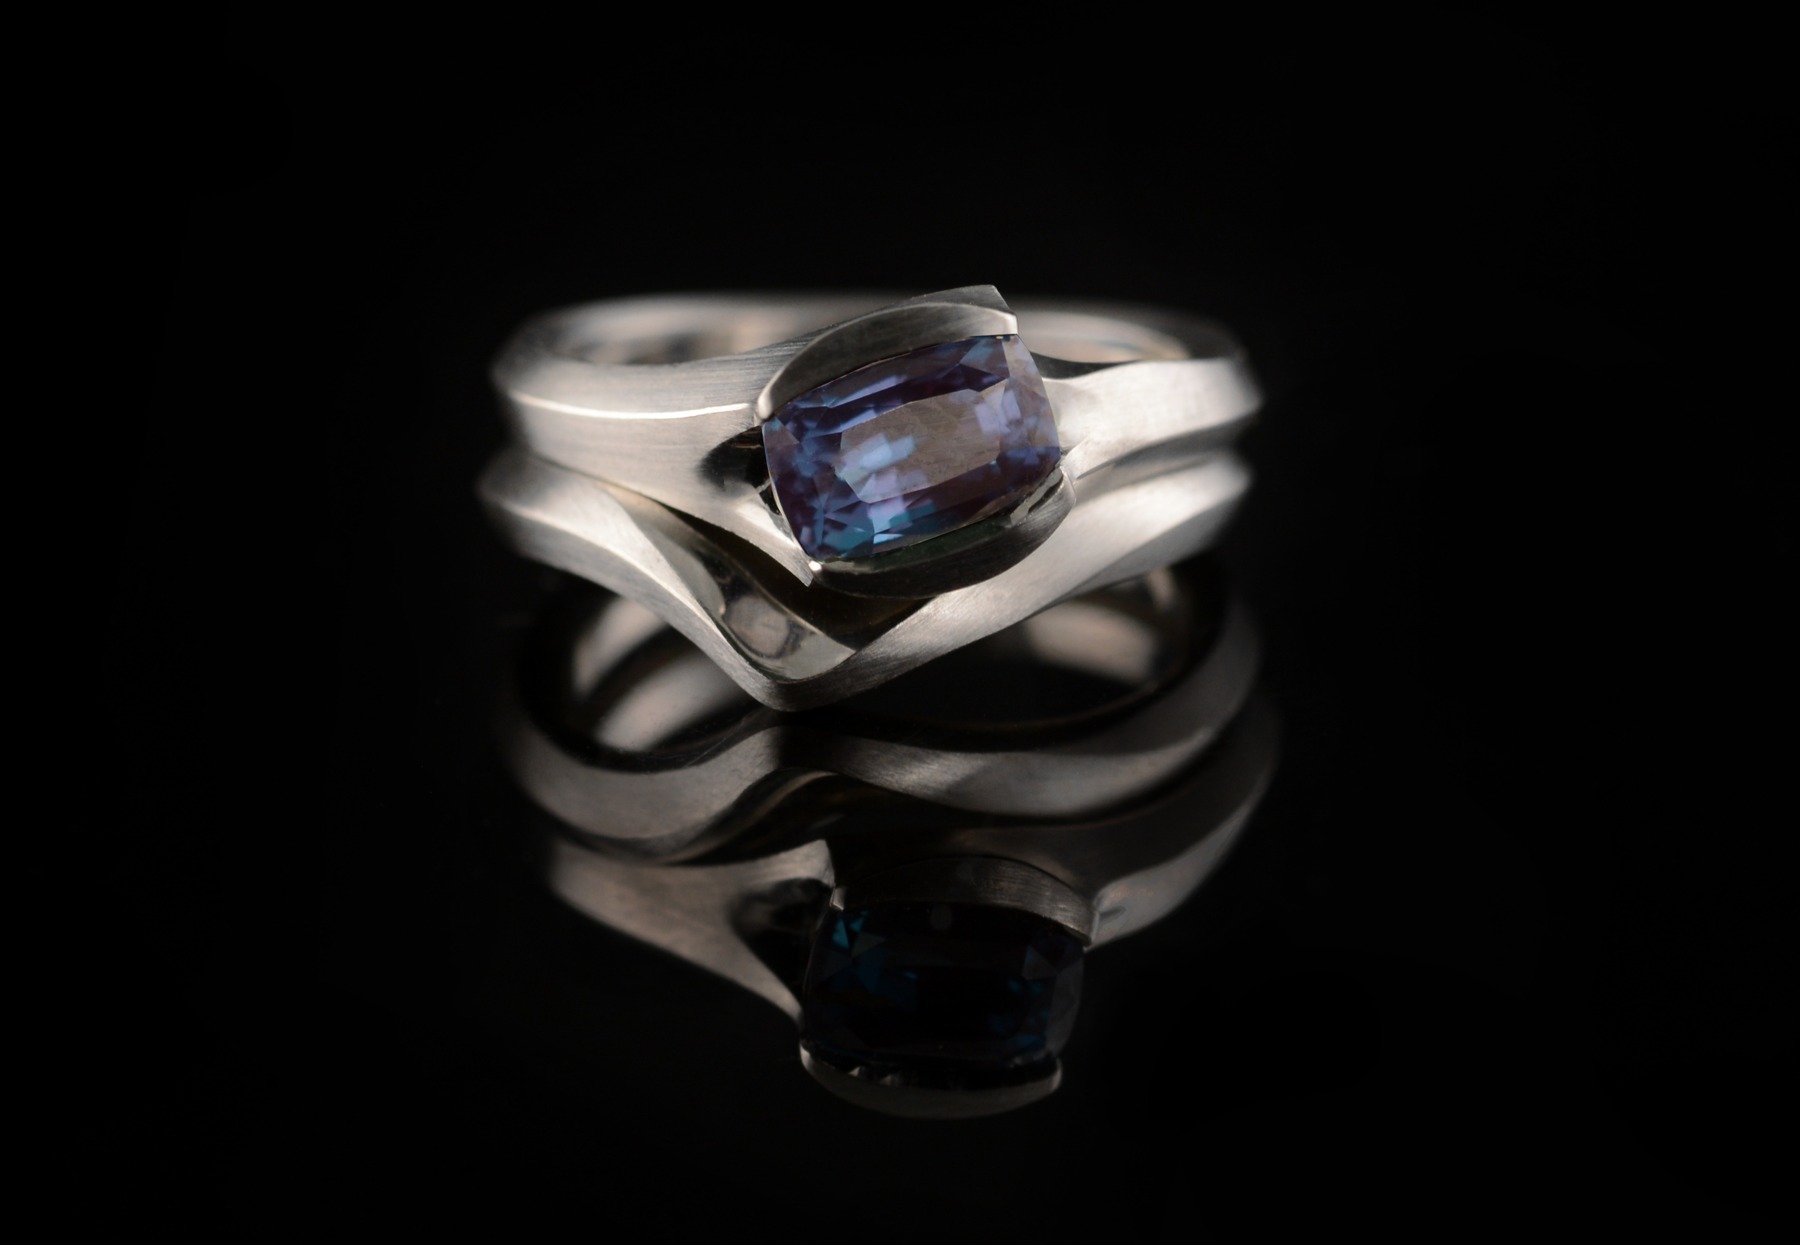 Alexandrite and platinum carved engagement ring with fitted wedding band